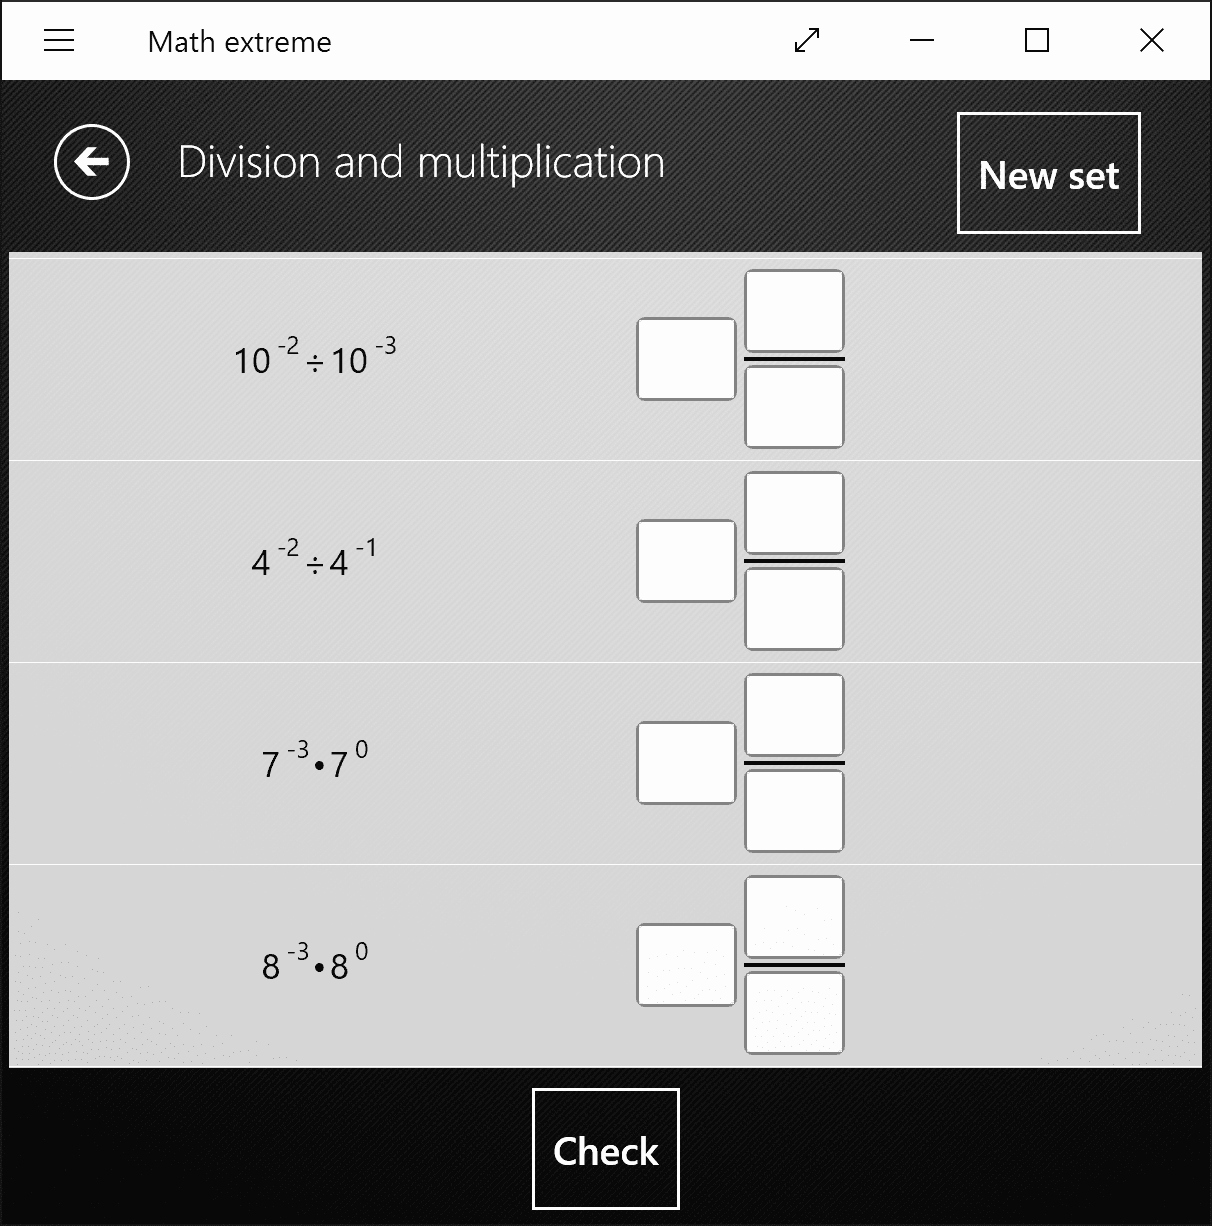 Multiplication Properties Of Exponents Worksheet Awesome Math Extreme New Worksheets Exponents